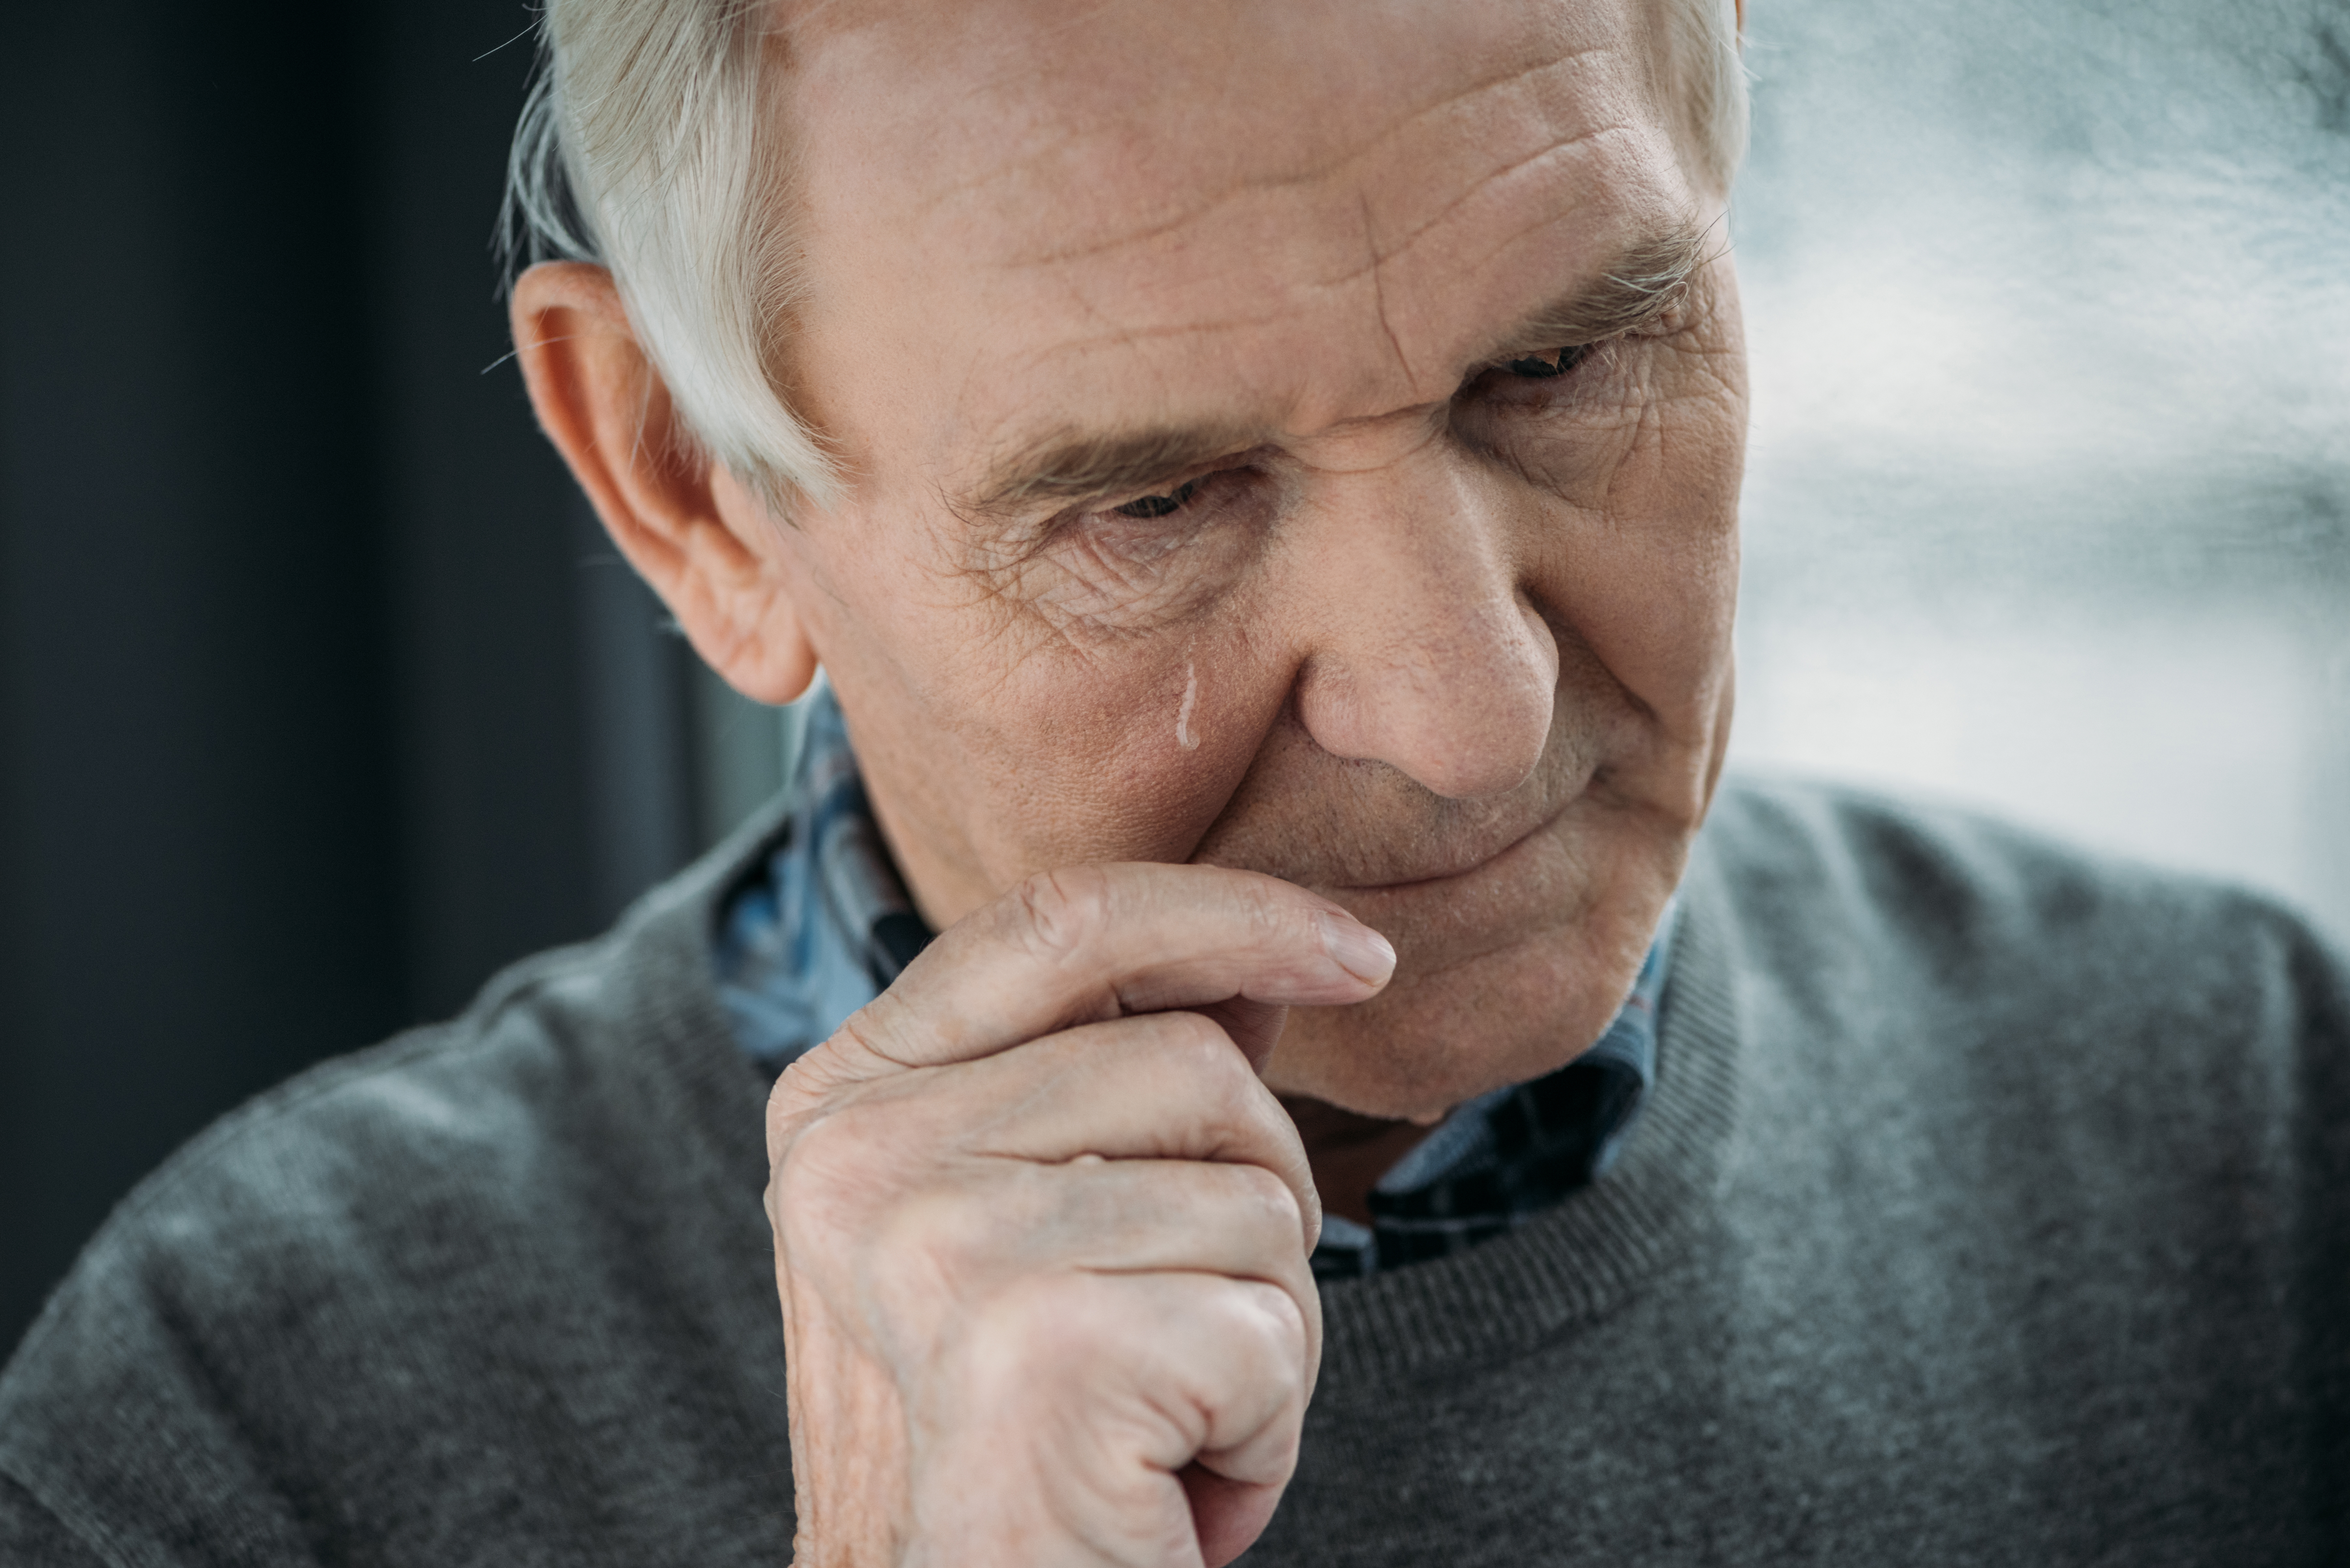 Older man crying and wiping away a tear | Source: Shutterstock